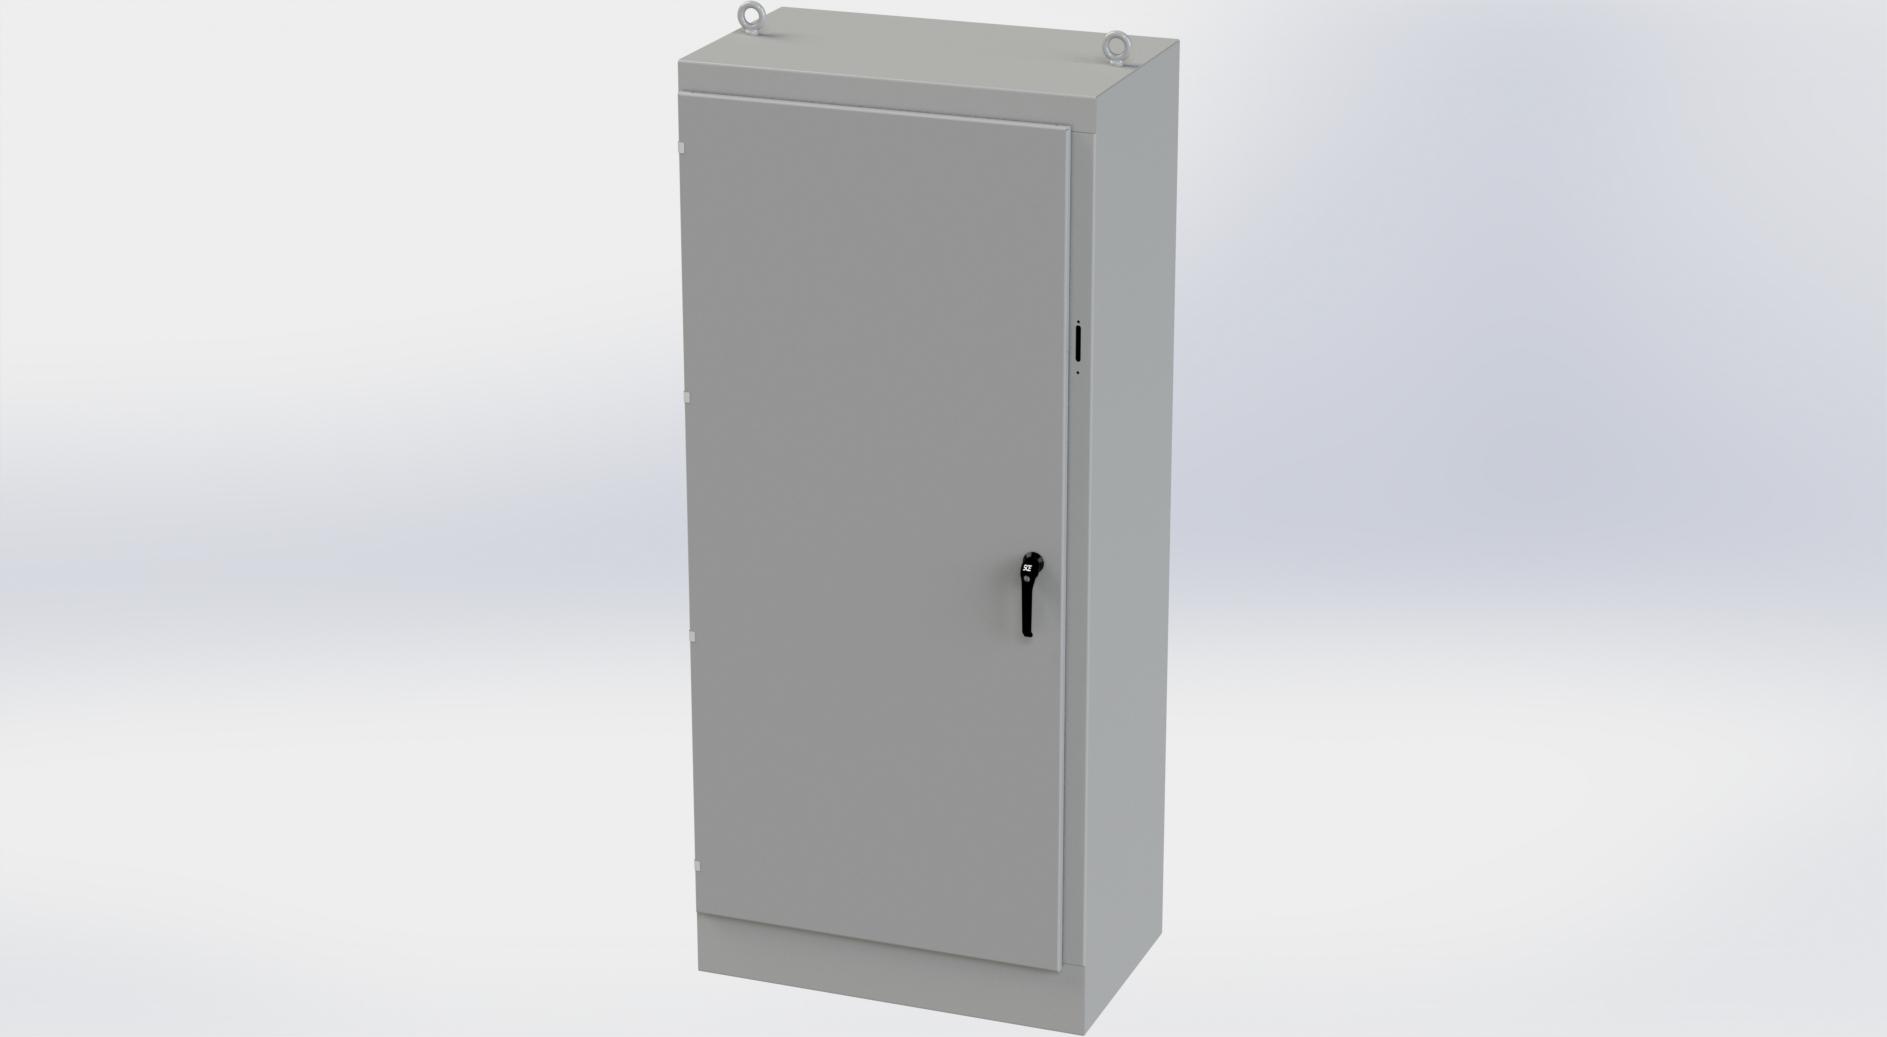 Saginaw Control SCE-90XM4024G 1DR XM Enclosure, Height:90.00", Width:39.50", Depth:24.00", ANSI-61 gray powder coating inside and out. Sub-panels are powder coated white.  